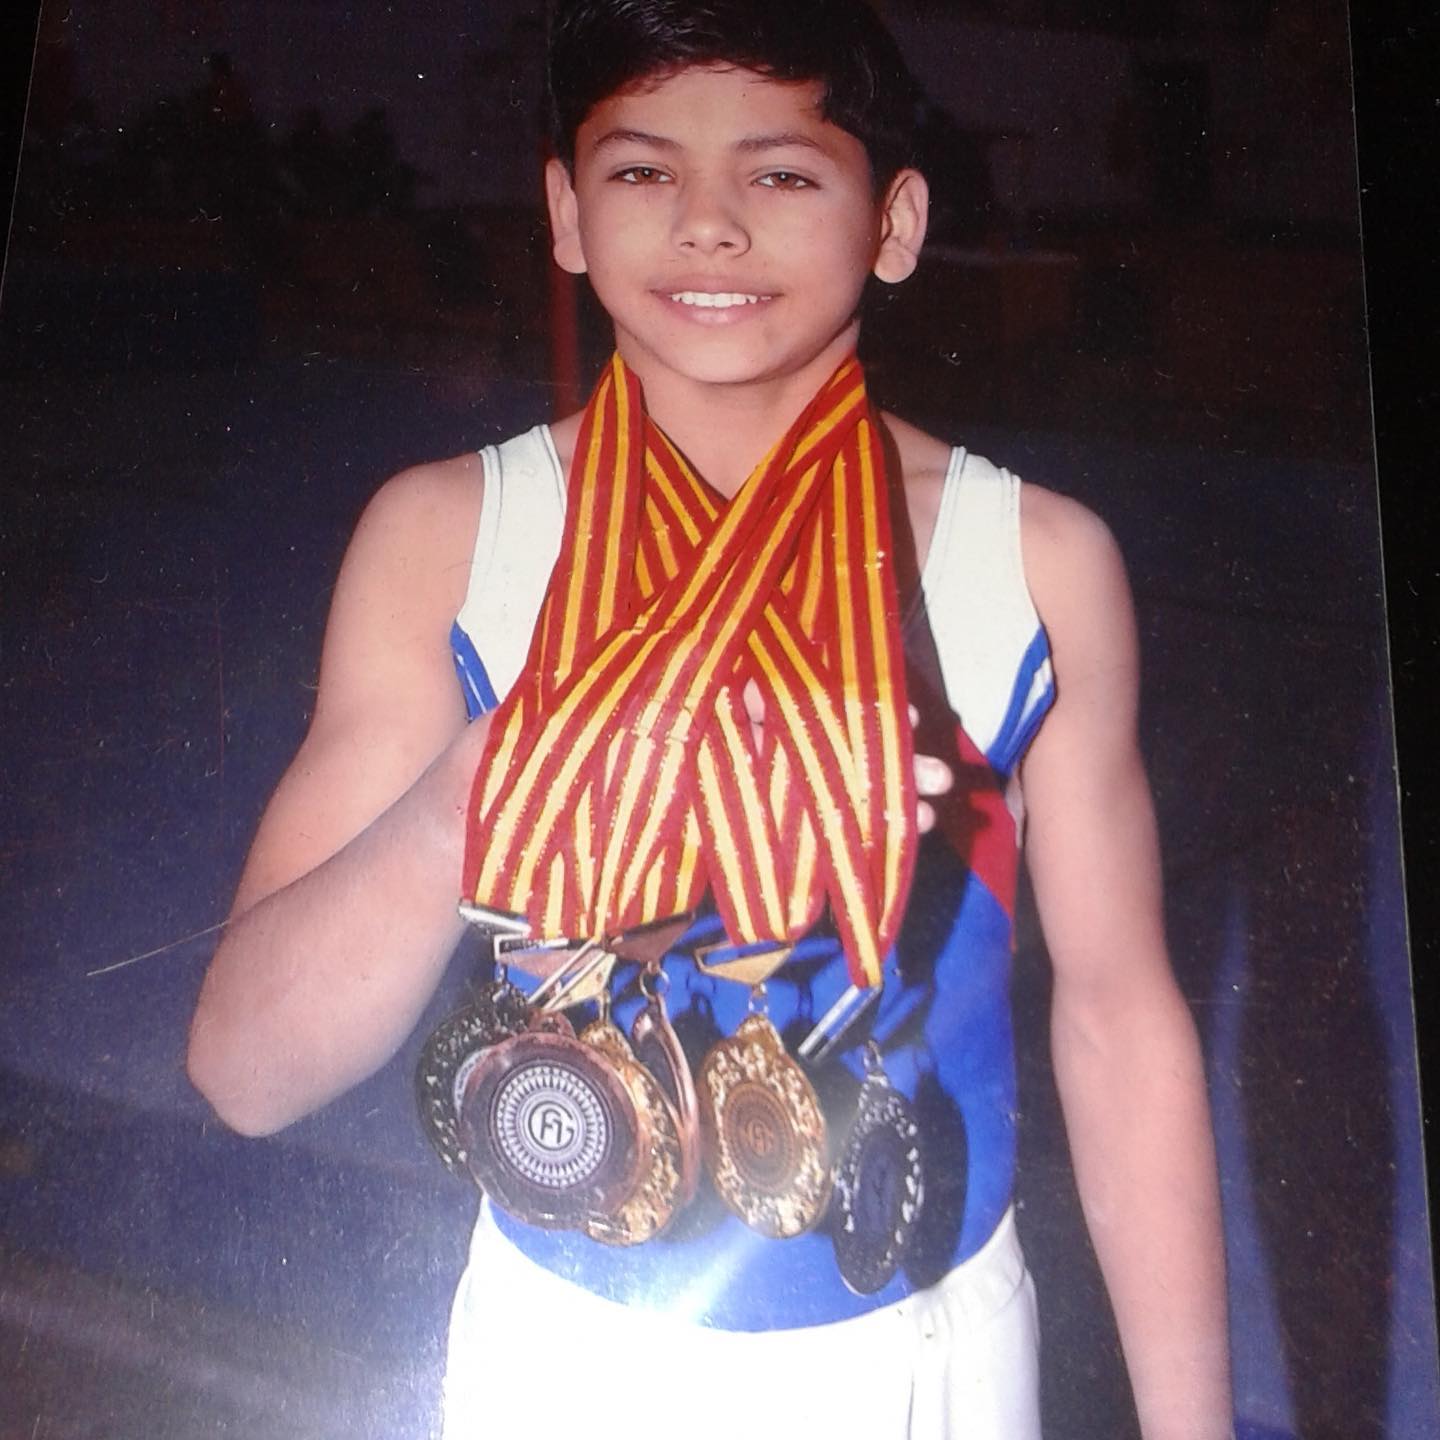 Siddharth Nigam posts a picture on Instagram wishing everyone a happy National Sports Day